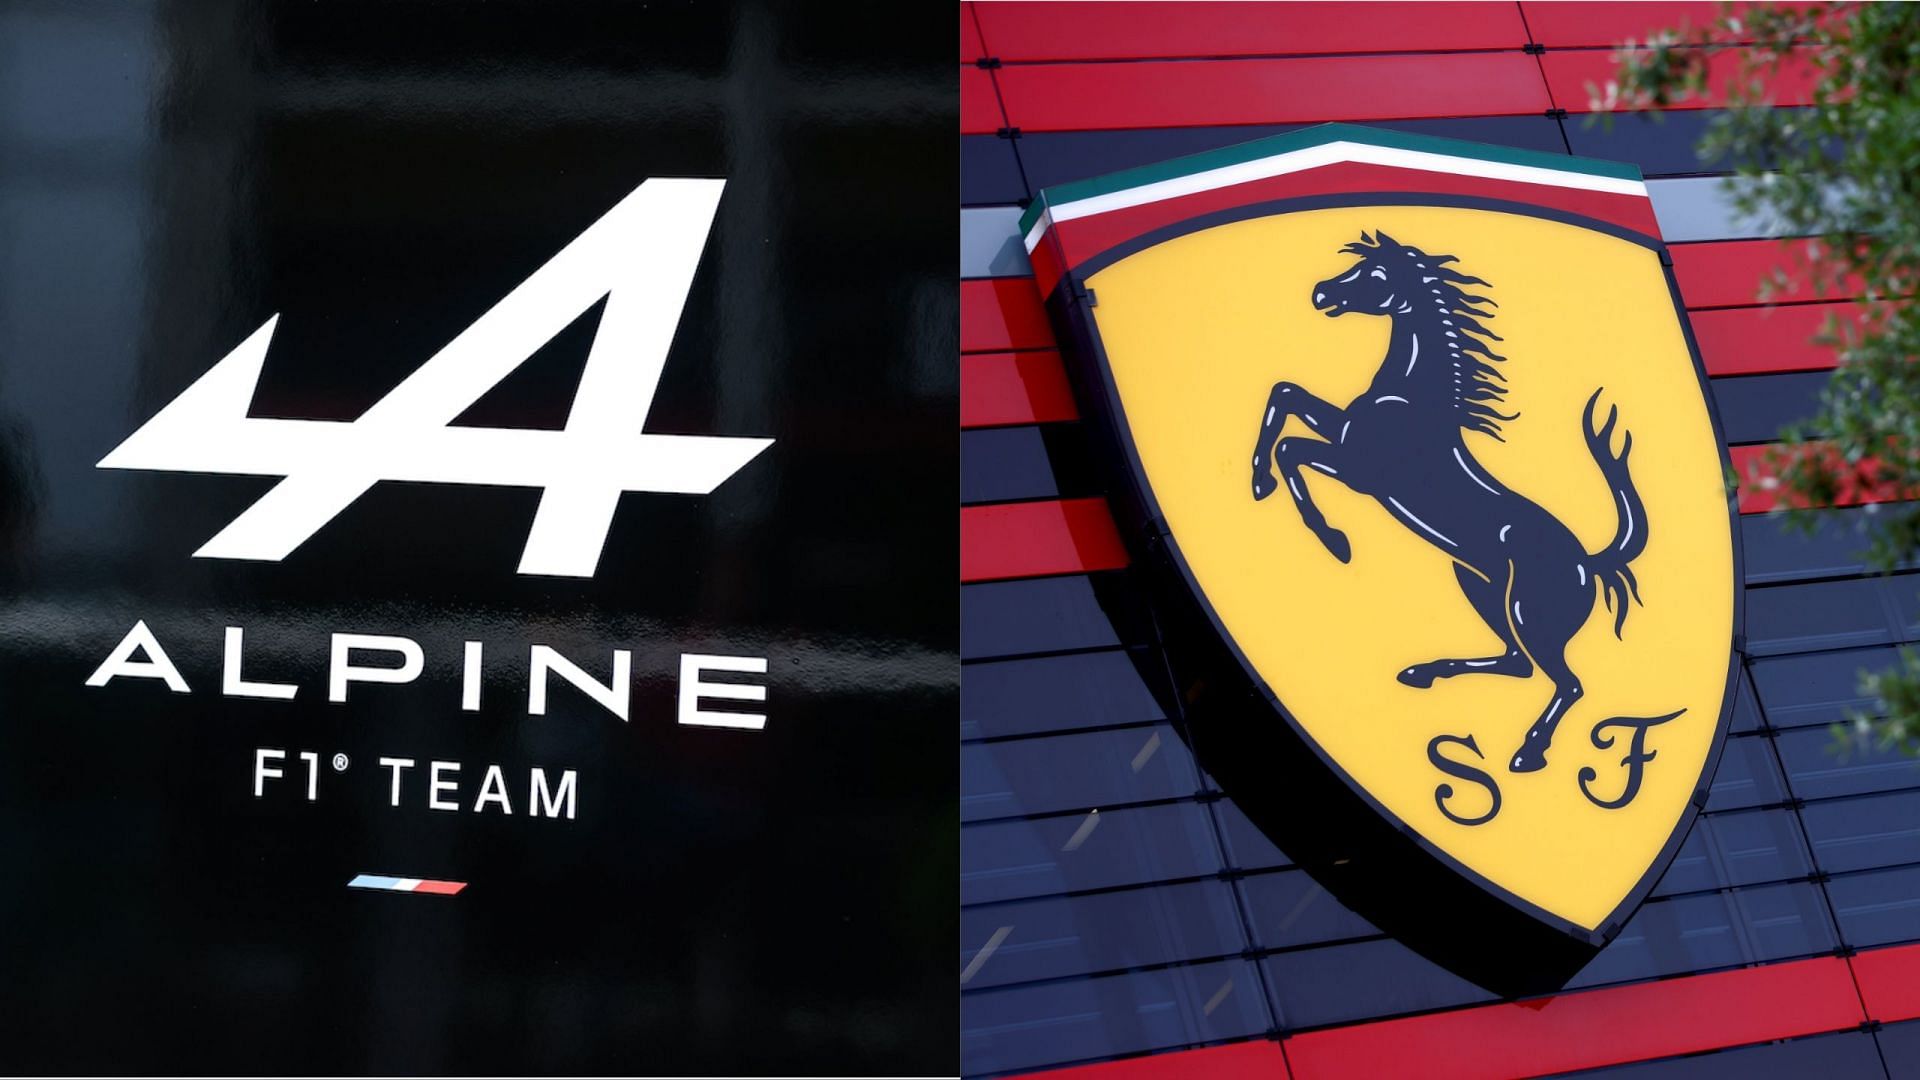 Alpine wants to be the French Ferrari 